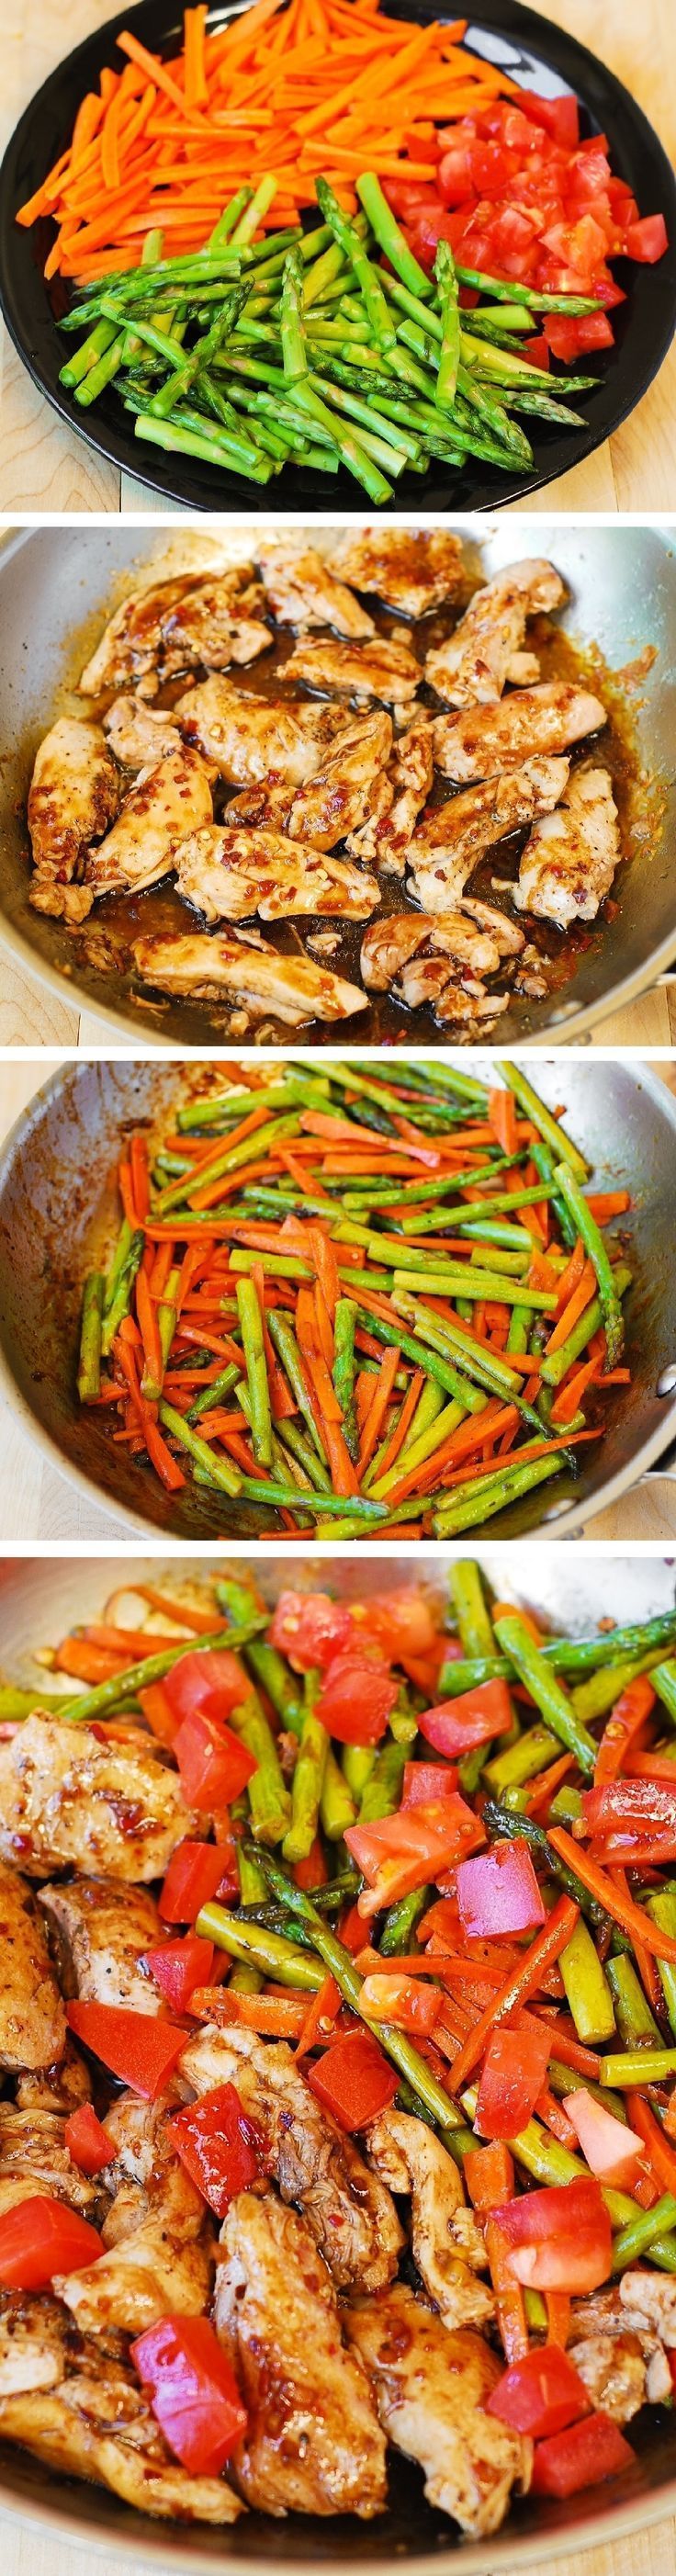 Balsamic Chicken with Asparagus and Tomatoes by bhg: Delicious, healthy, low fat, low cholesterol, low calorie meal, packed with